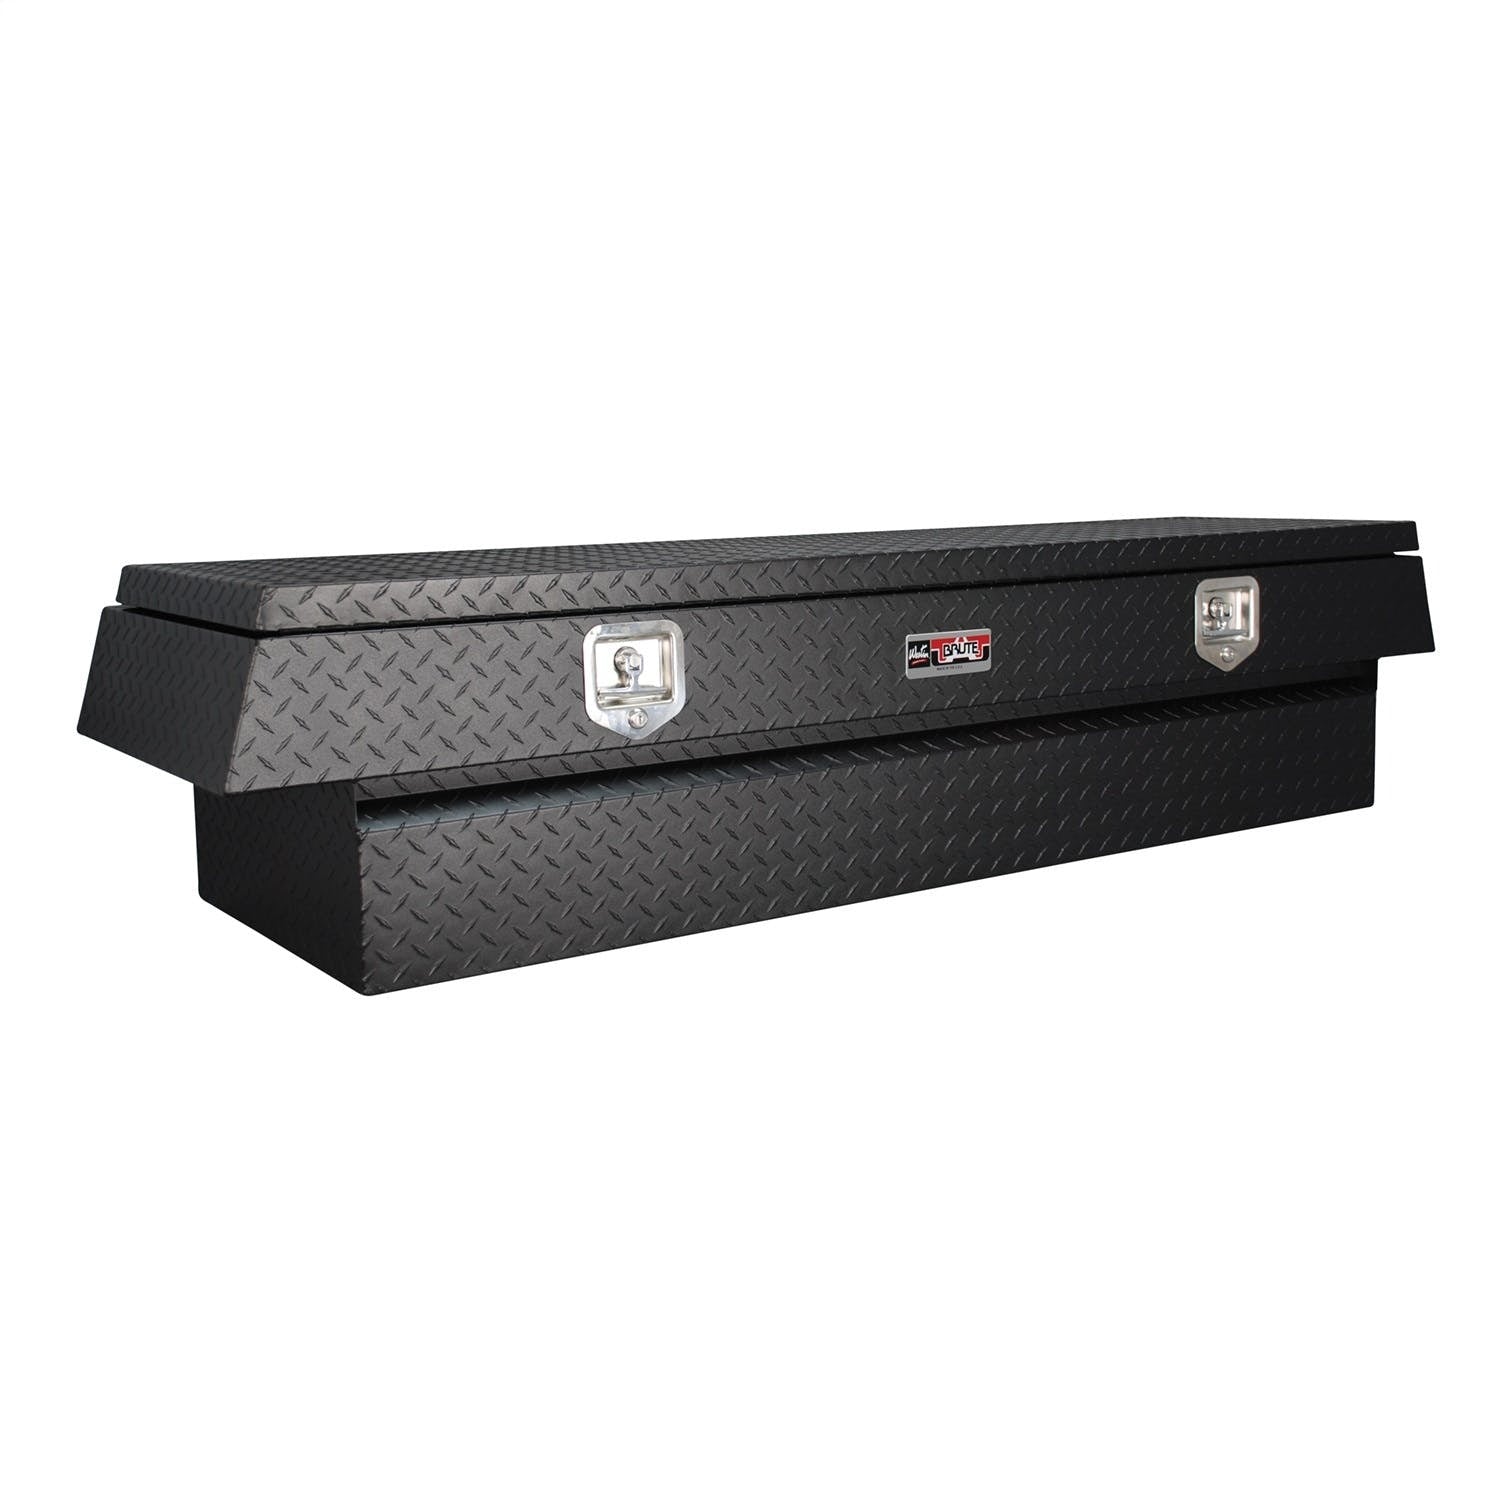 Westin Automotive 80-RB124GW-BT Gull Wing Lid Full Size Standard Overall Dims: 71x20x18 In.; Base Dims: 60x20x11